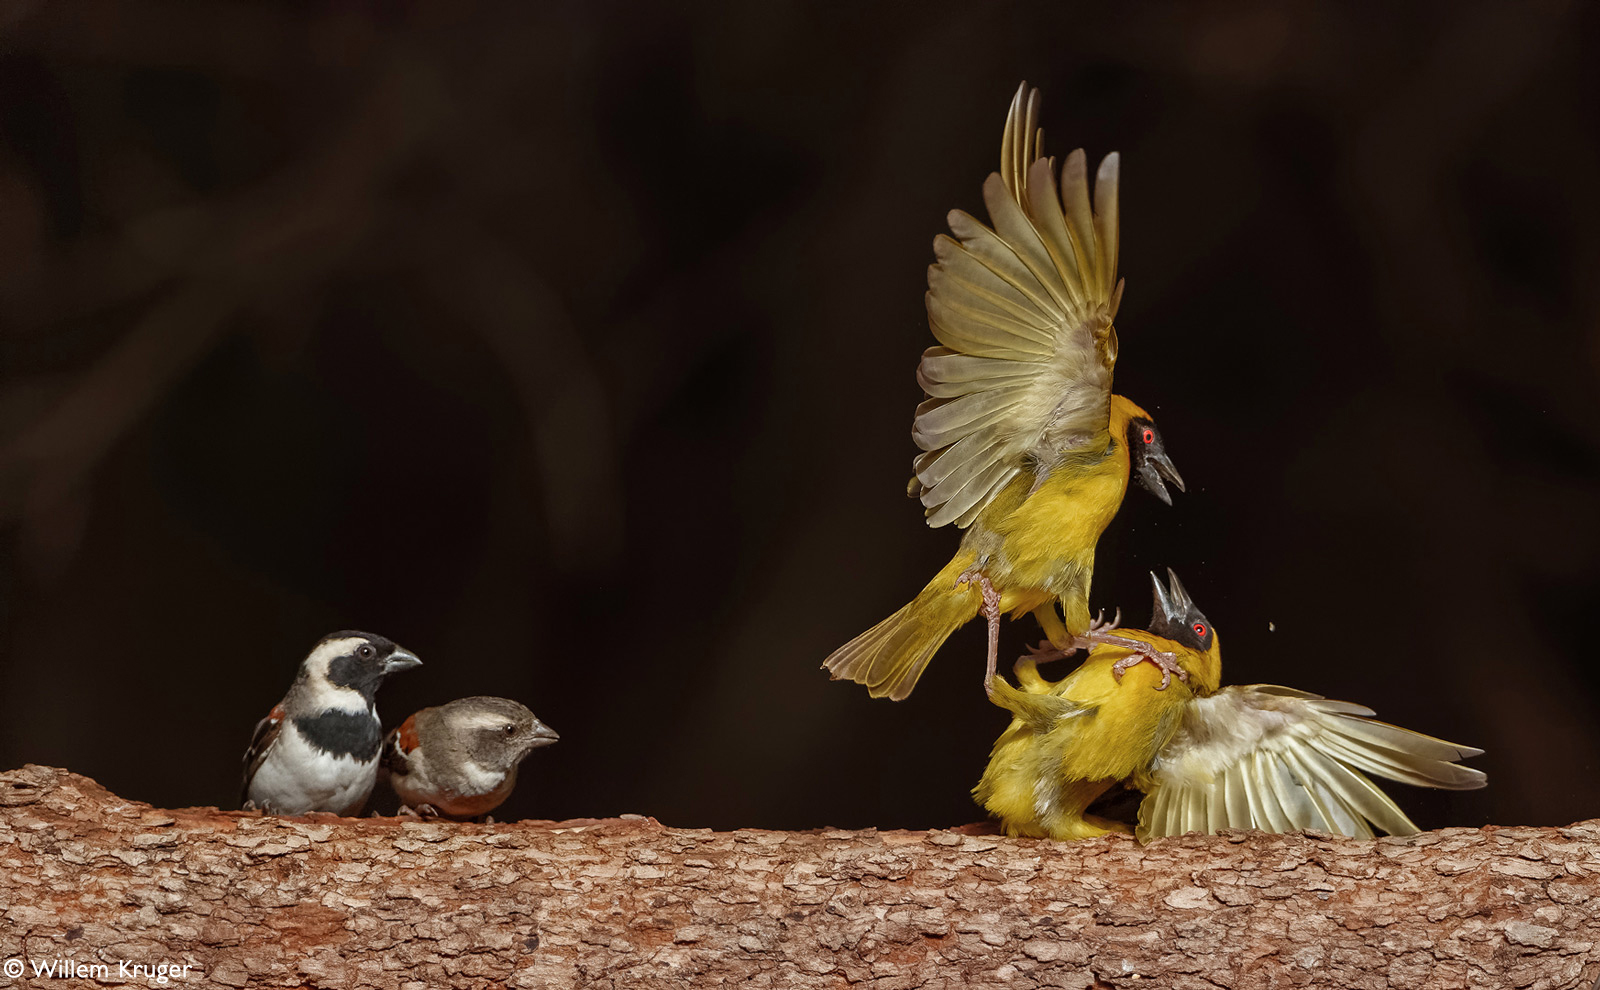 Two male southern masked weavers fight to establish dominance while sparrows watch on. Bloemfontein, South Africa © Willem Kruger